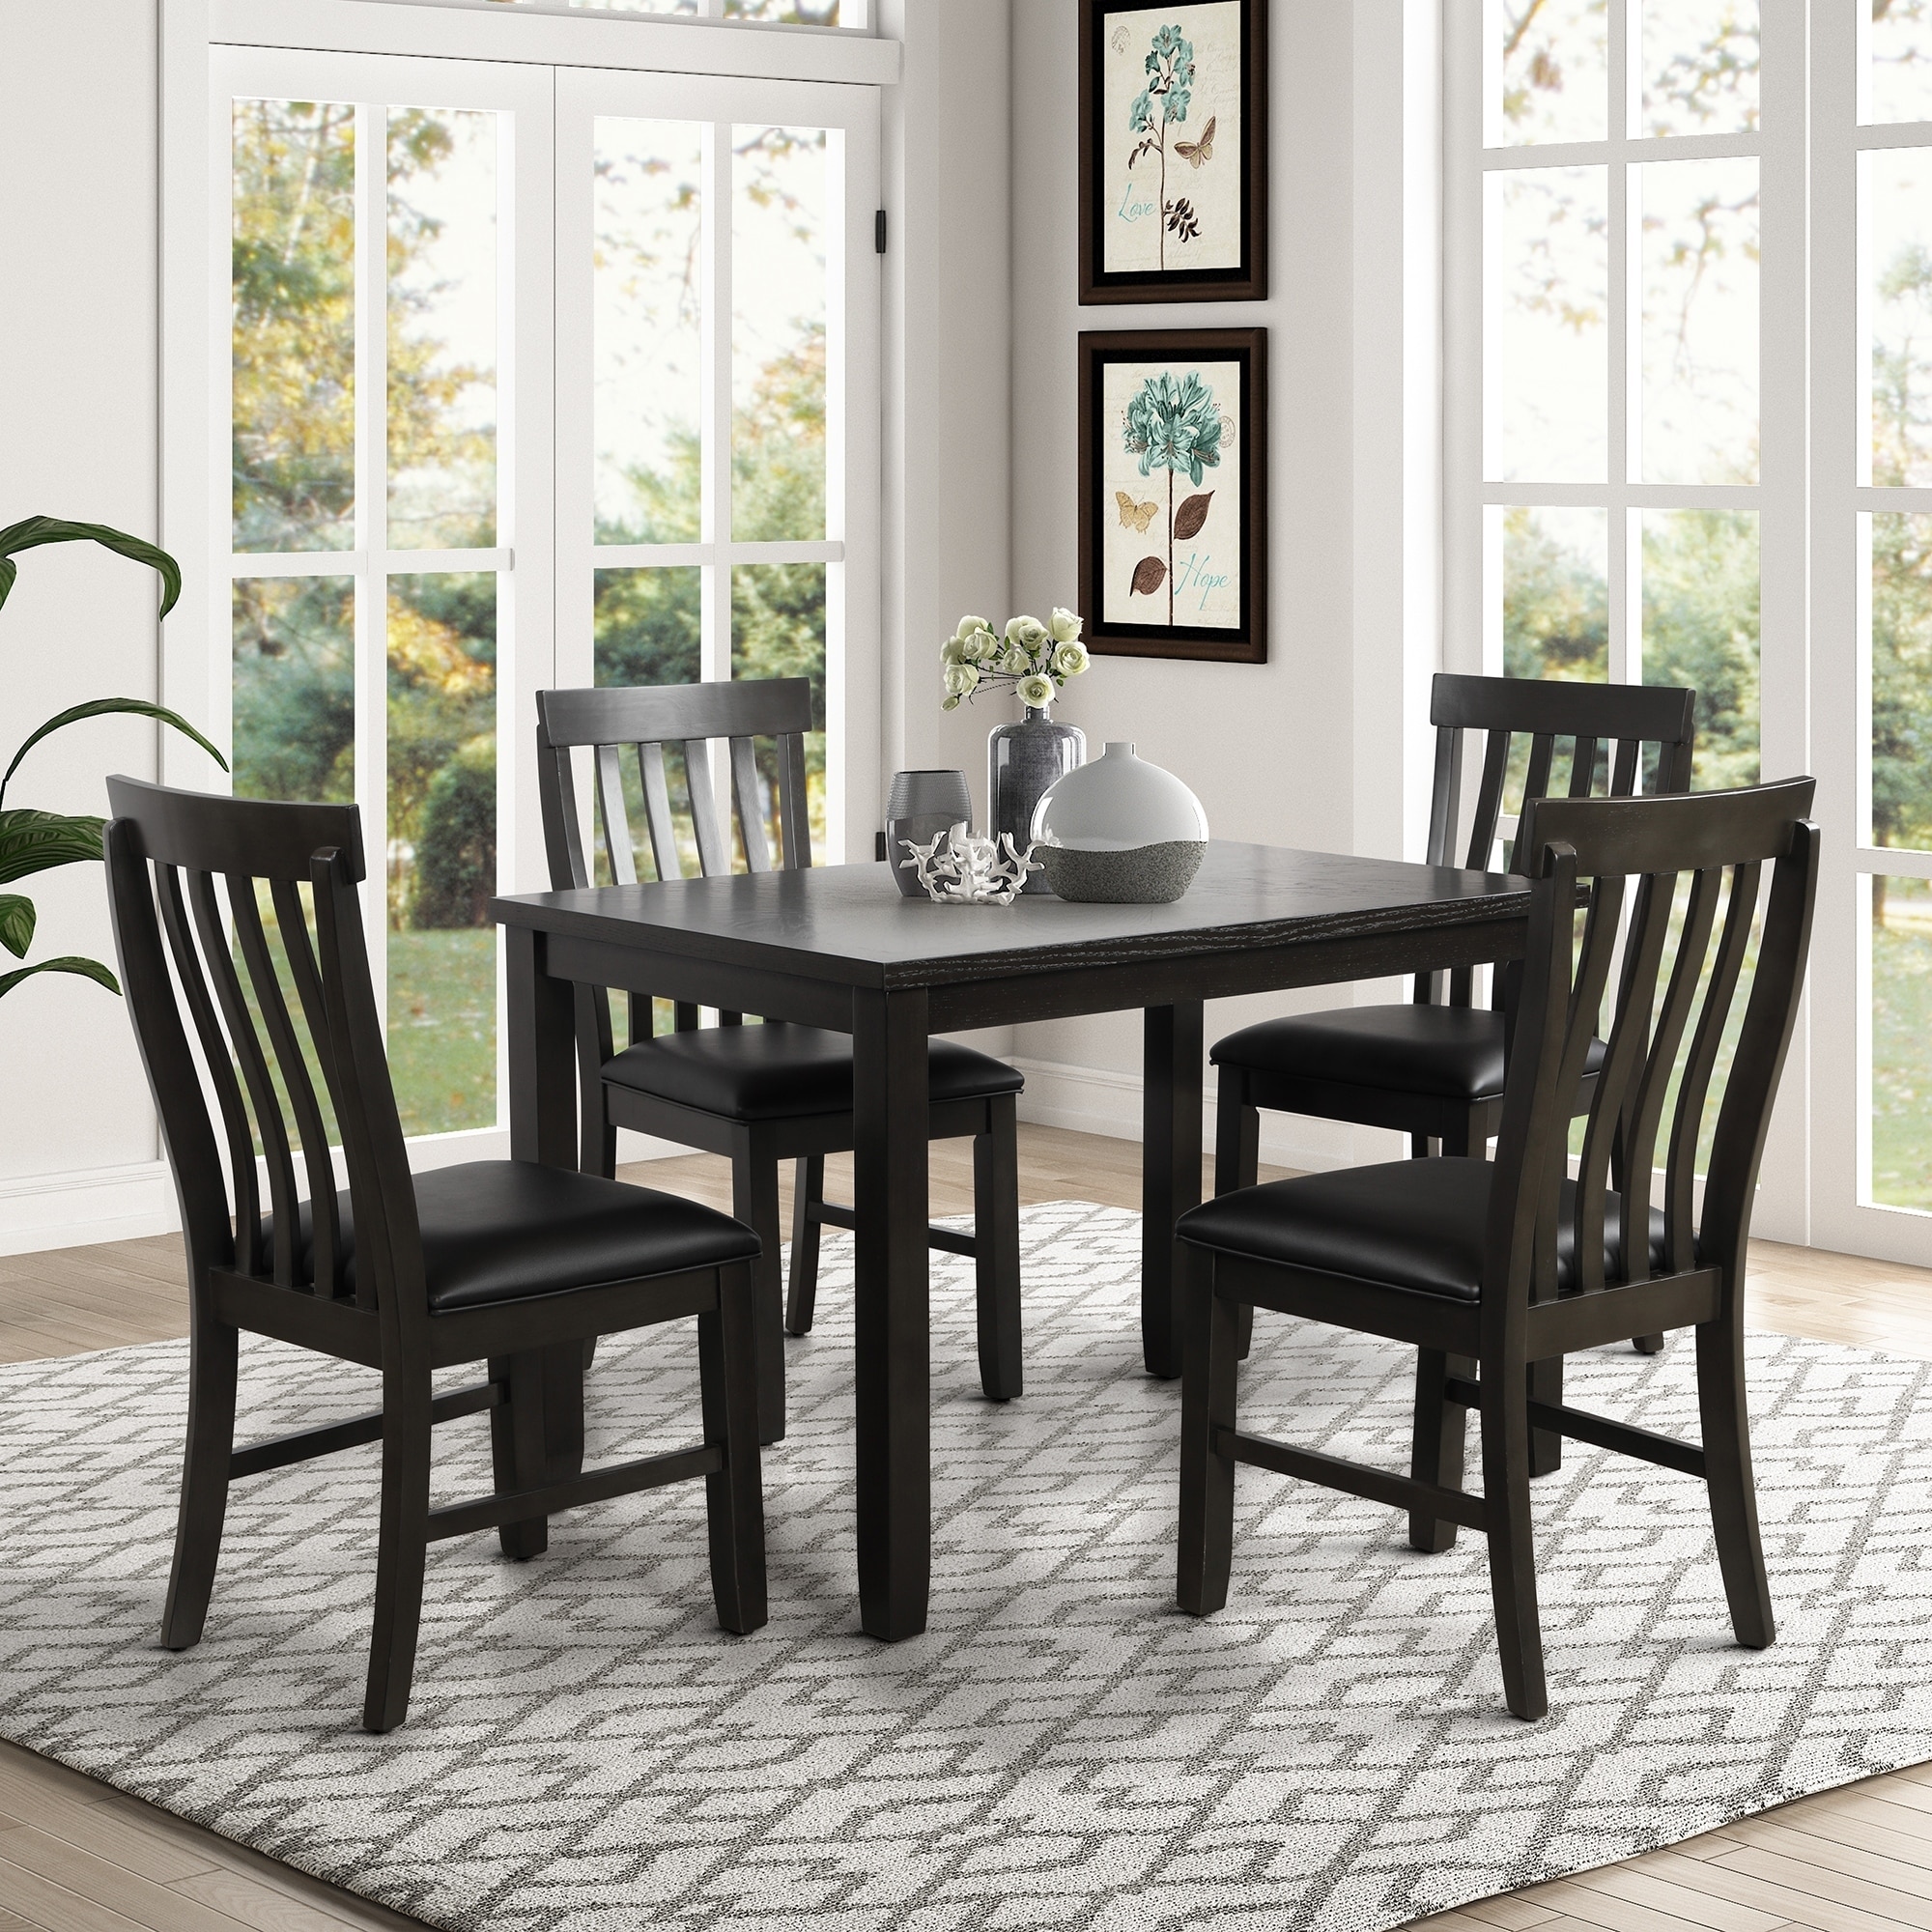 Counter Height Kitchen Table And 4 Chairs With Upholstered Seat And Footrest Merax 5 Piece Wood Dining Table Set Grey Wash Oak Kitchen Dining Room Furniture Table Chair Sets